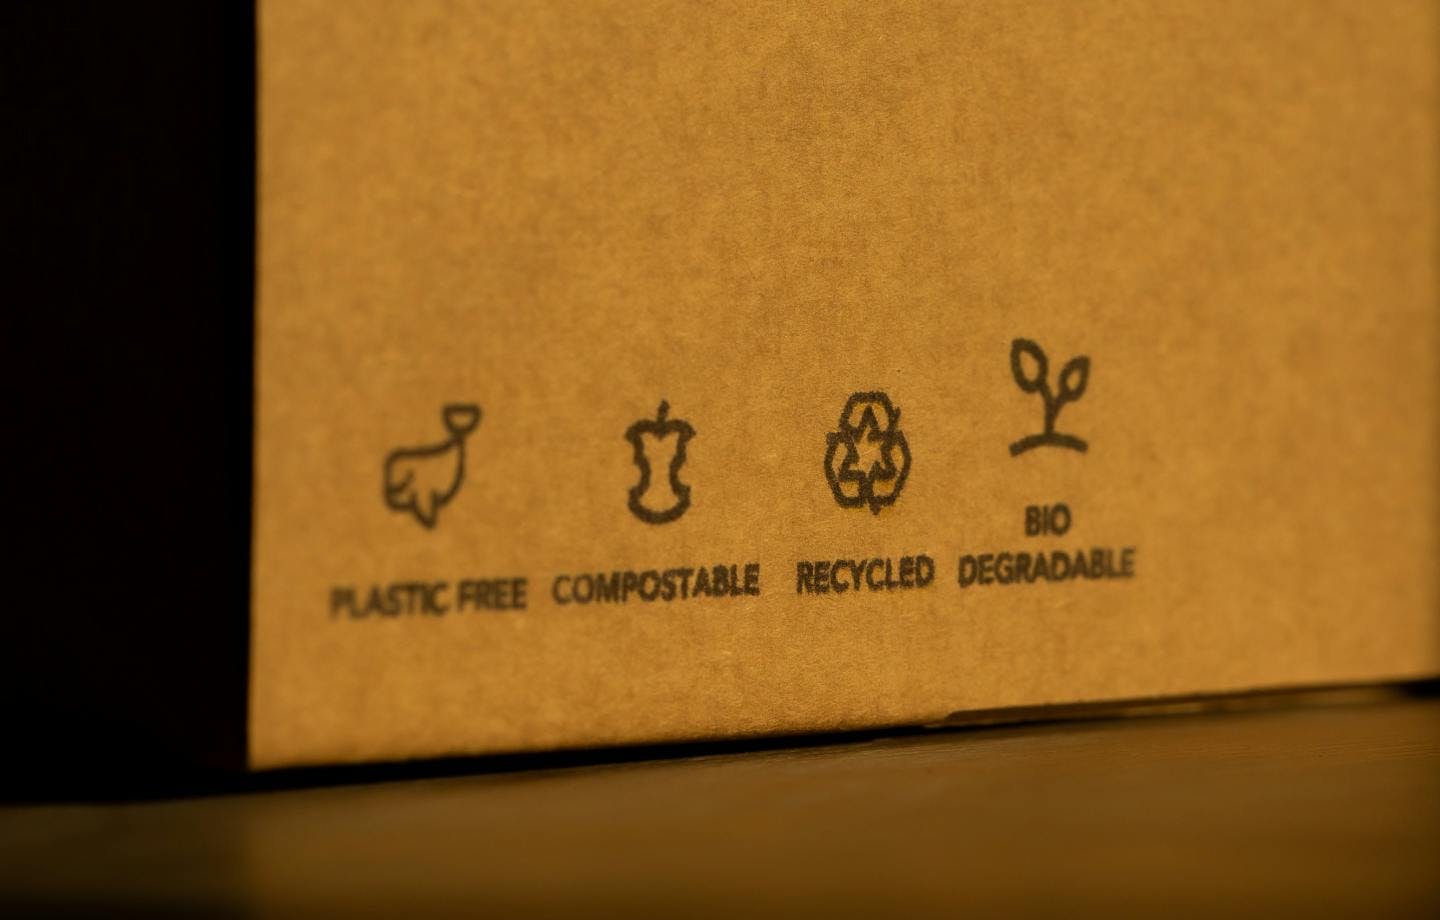 Plastic free, compostable, recycled, biodegradable labels shown on a cardboard box